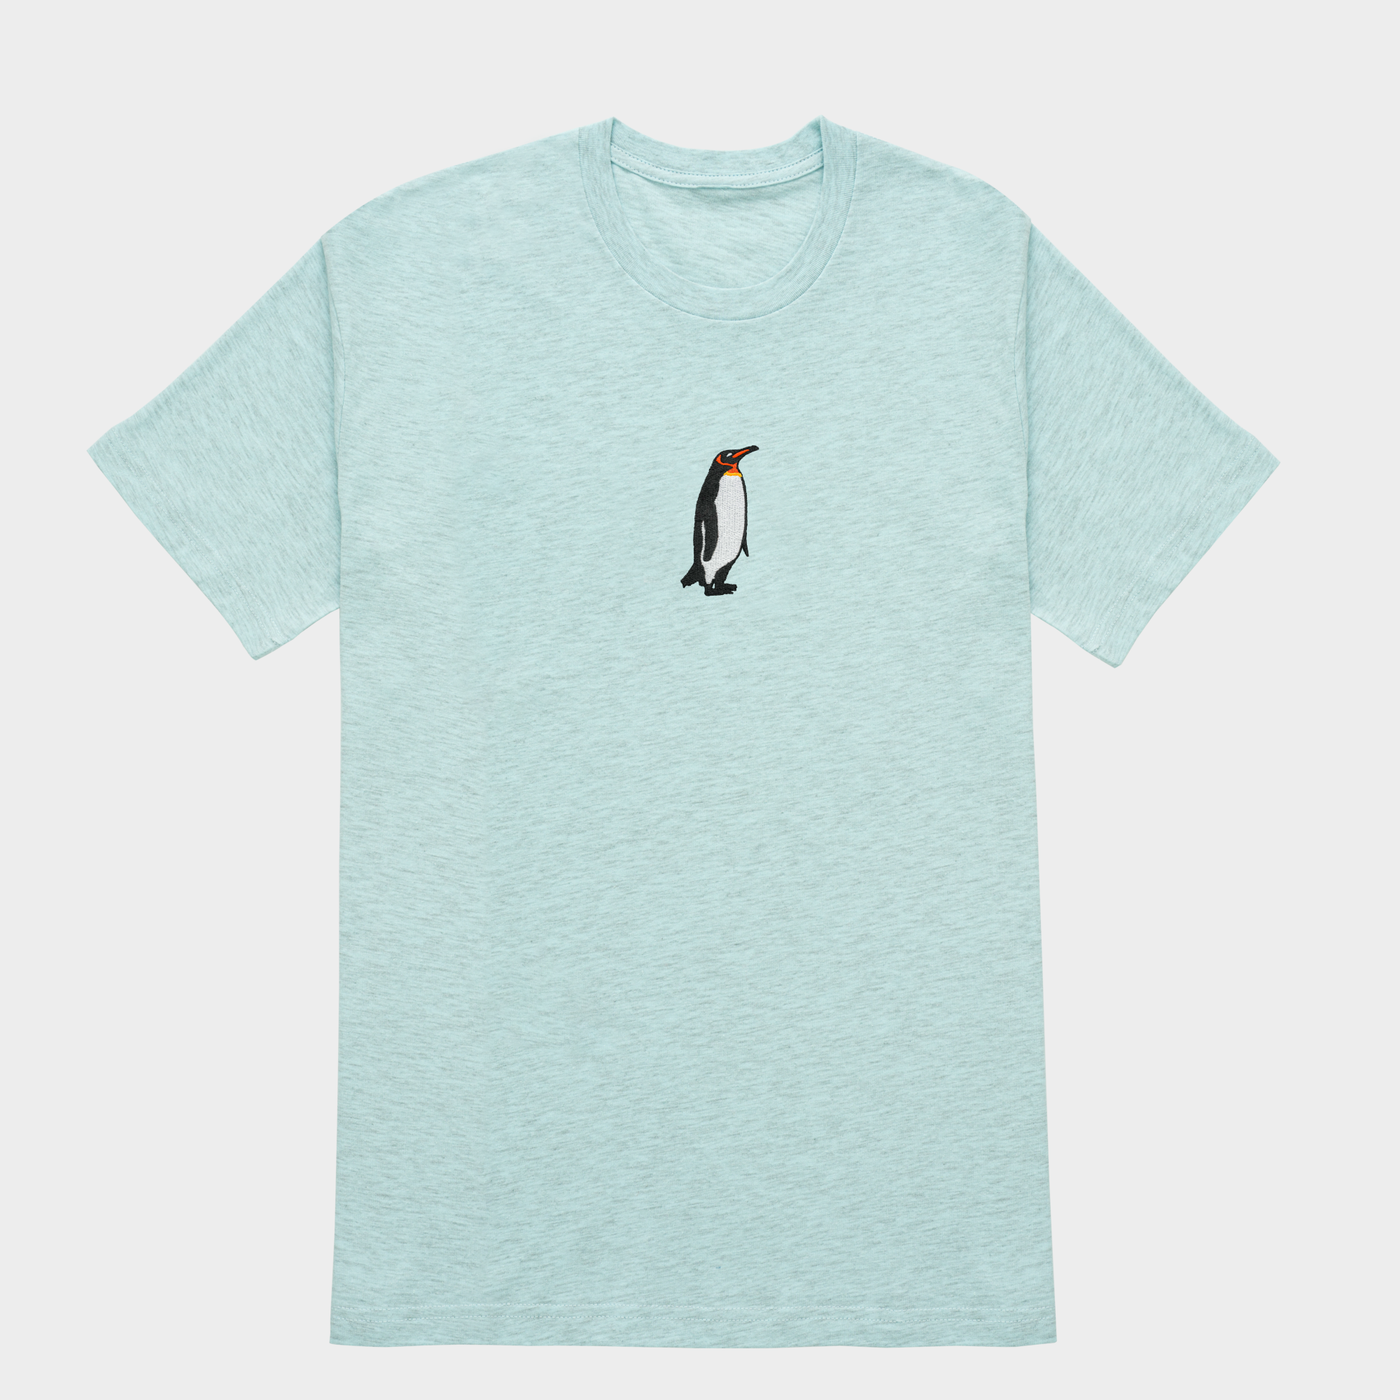 Bobby's Planet Men's Embroidered Penguin T-Shirt from Arctic Polar Animals Collection in Heather Prism Ice Blue Color#color_heather-prism-ice-blue